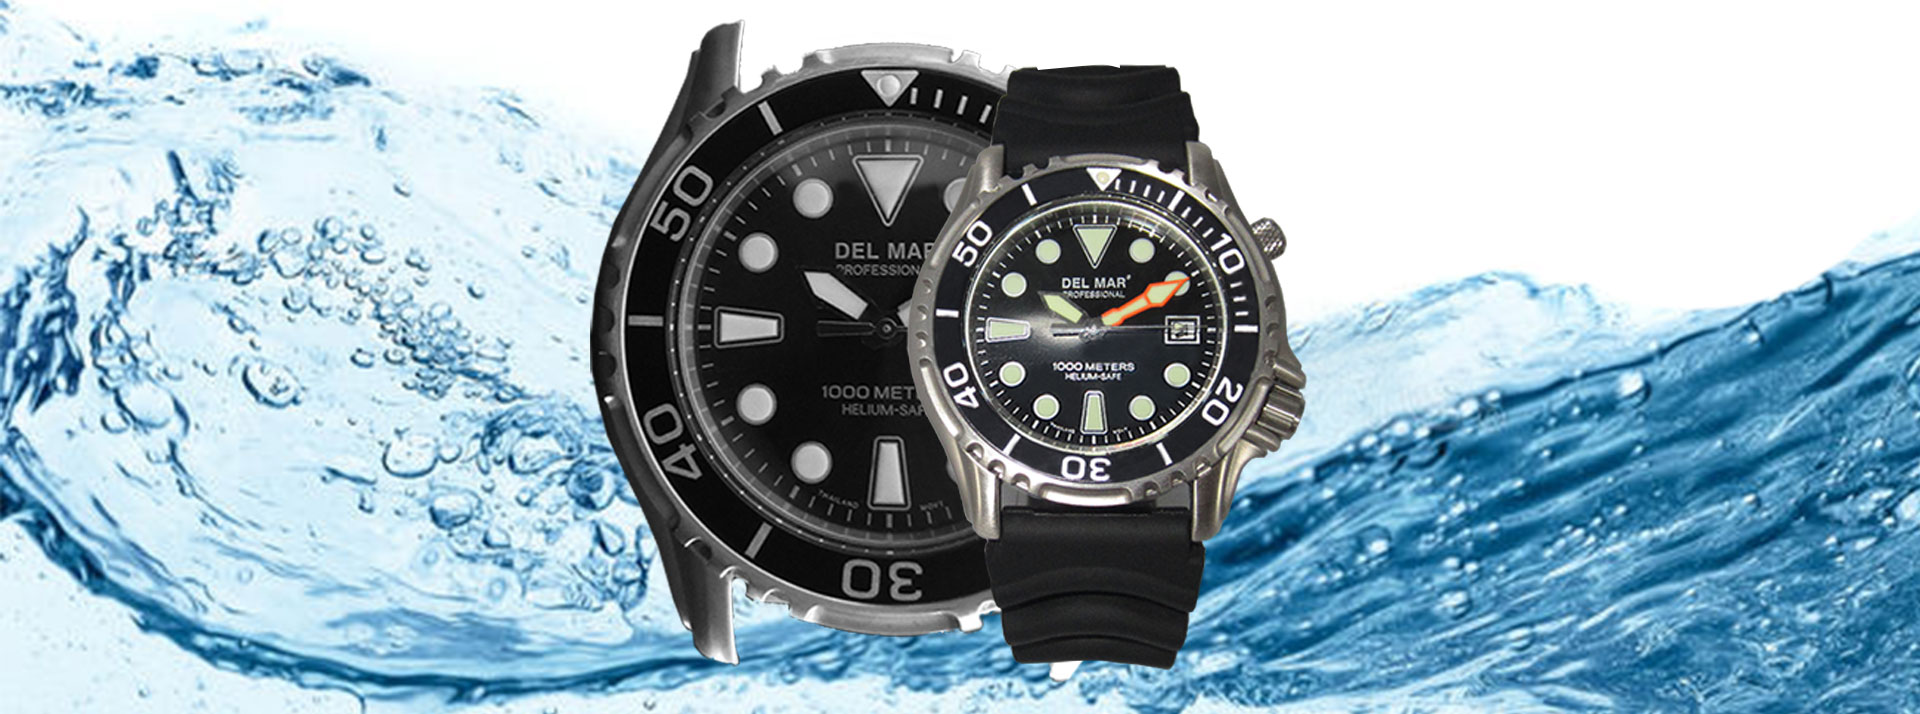 Del Mar Professional 1000 Meter Watch Collection